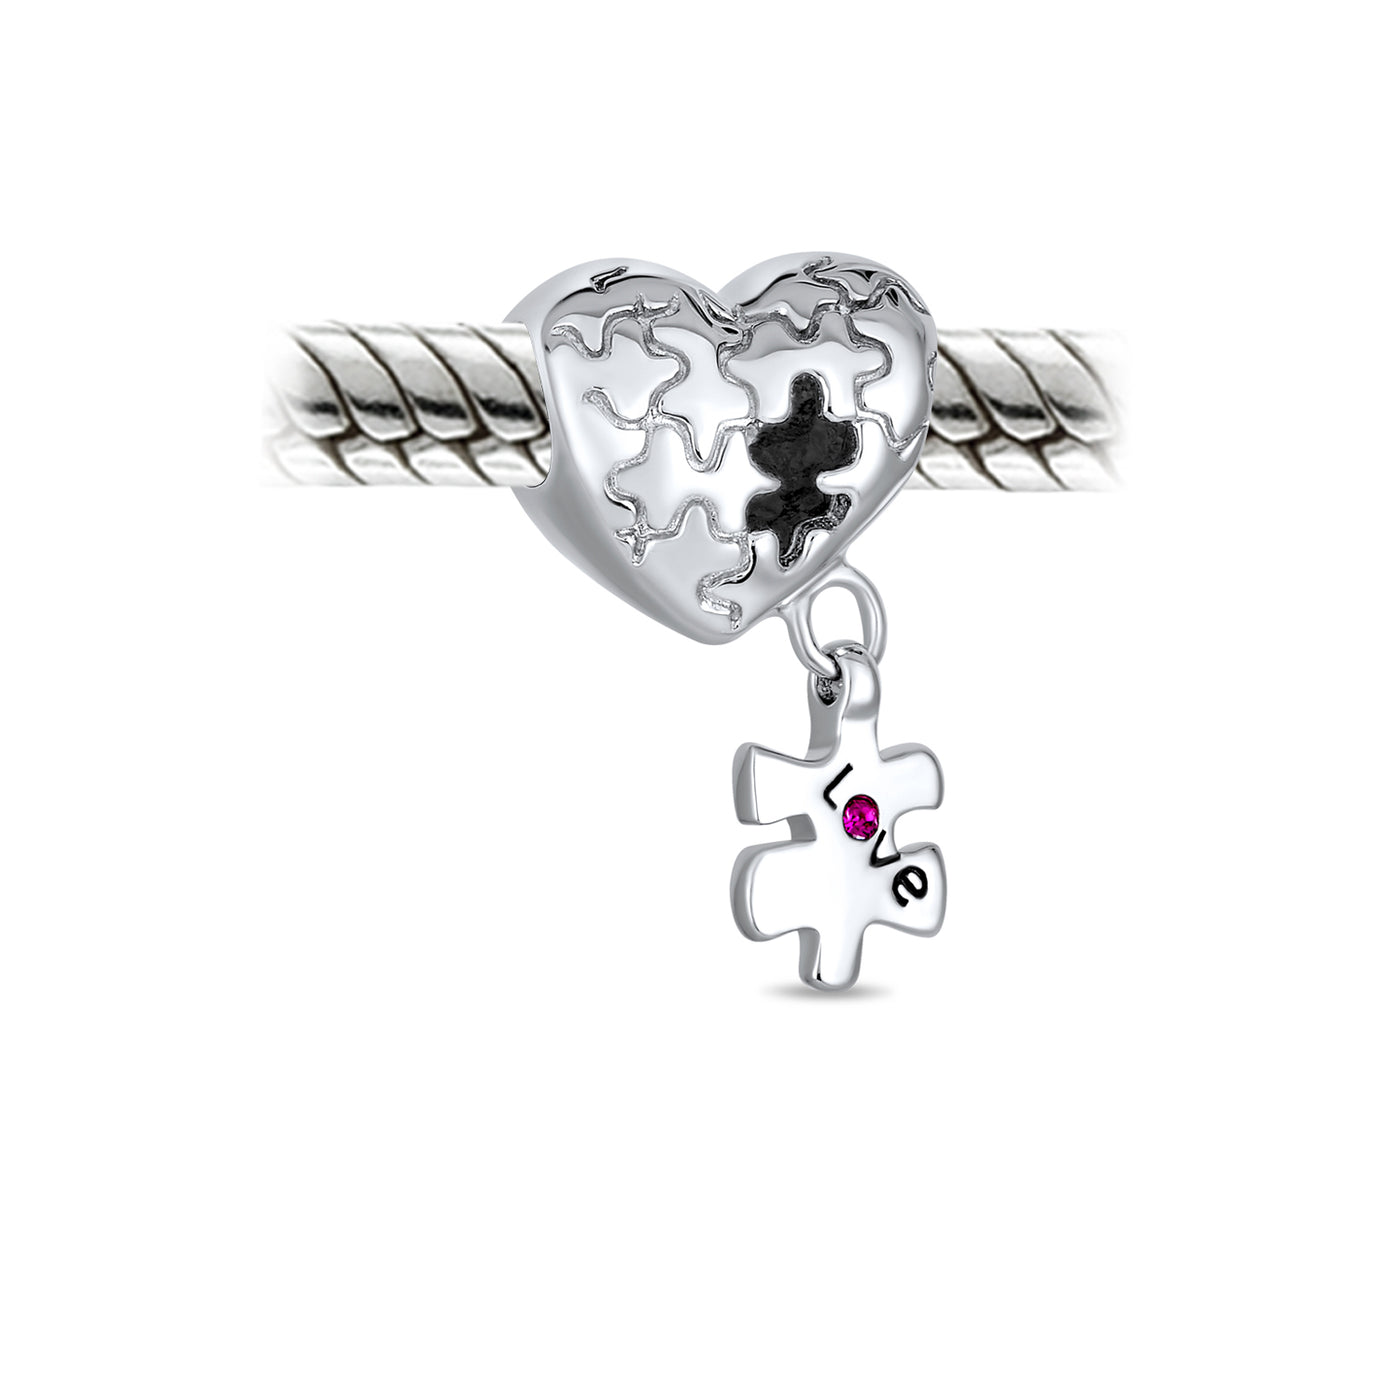 Autism Awareness Puzzle Piece Heart Love Charm Bead Sterling Silver